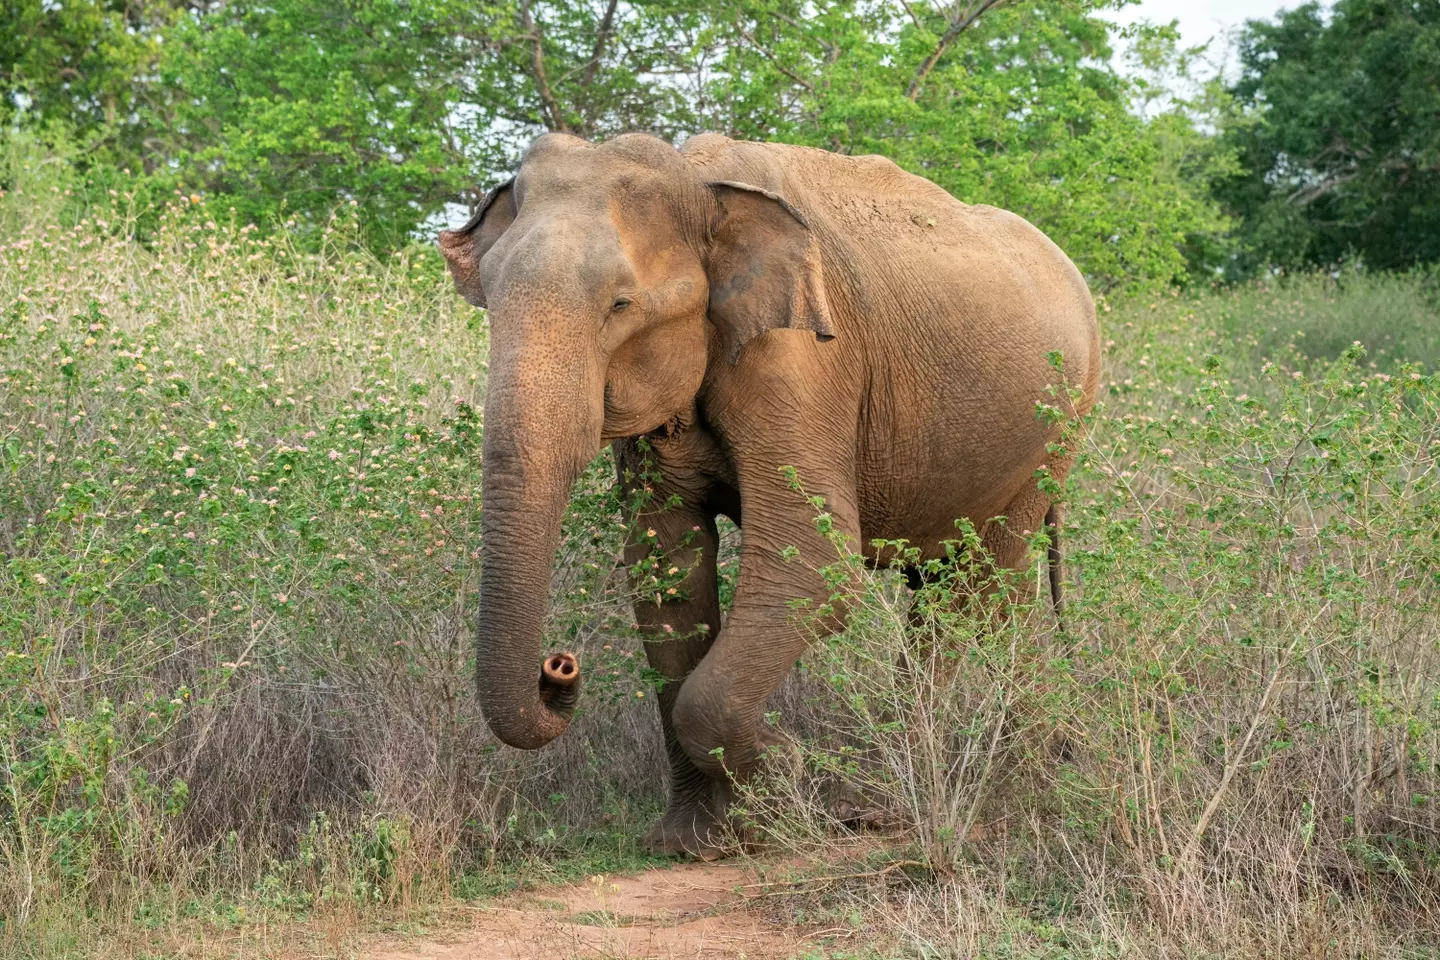 The Asian elephant is the mammoth's closest living relative.